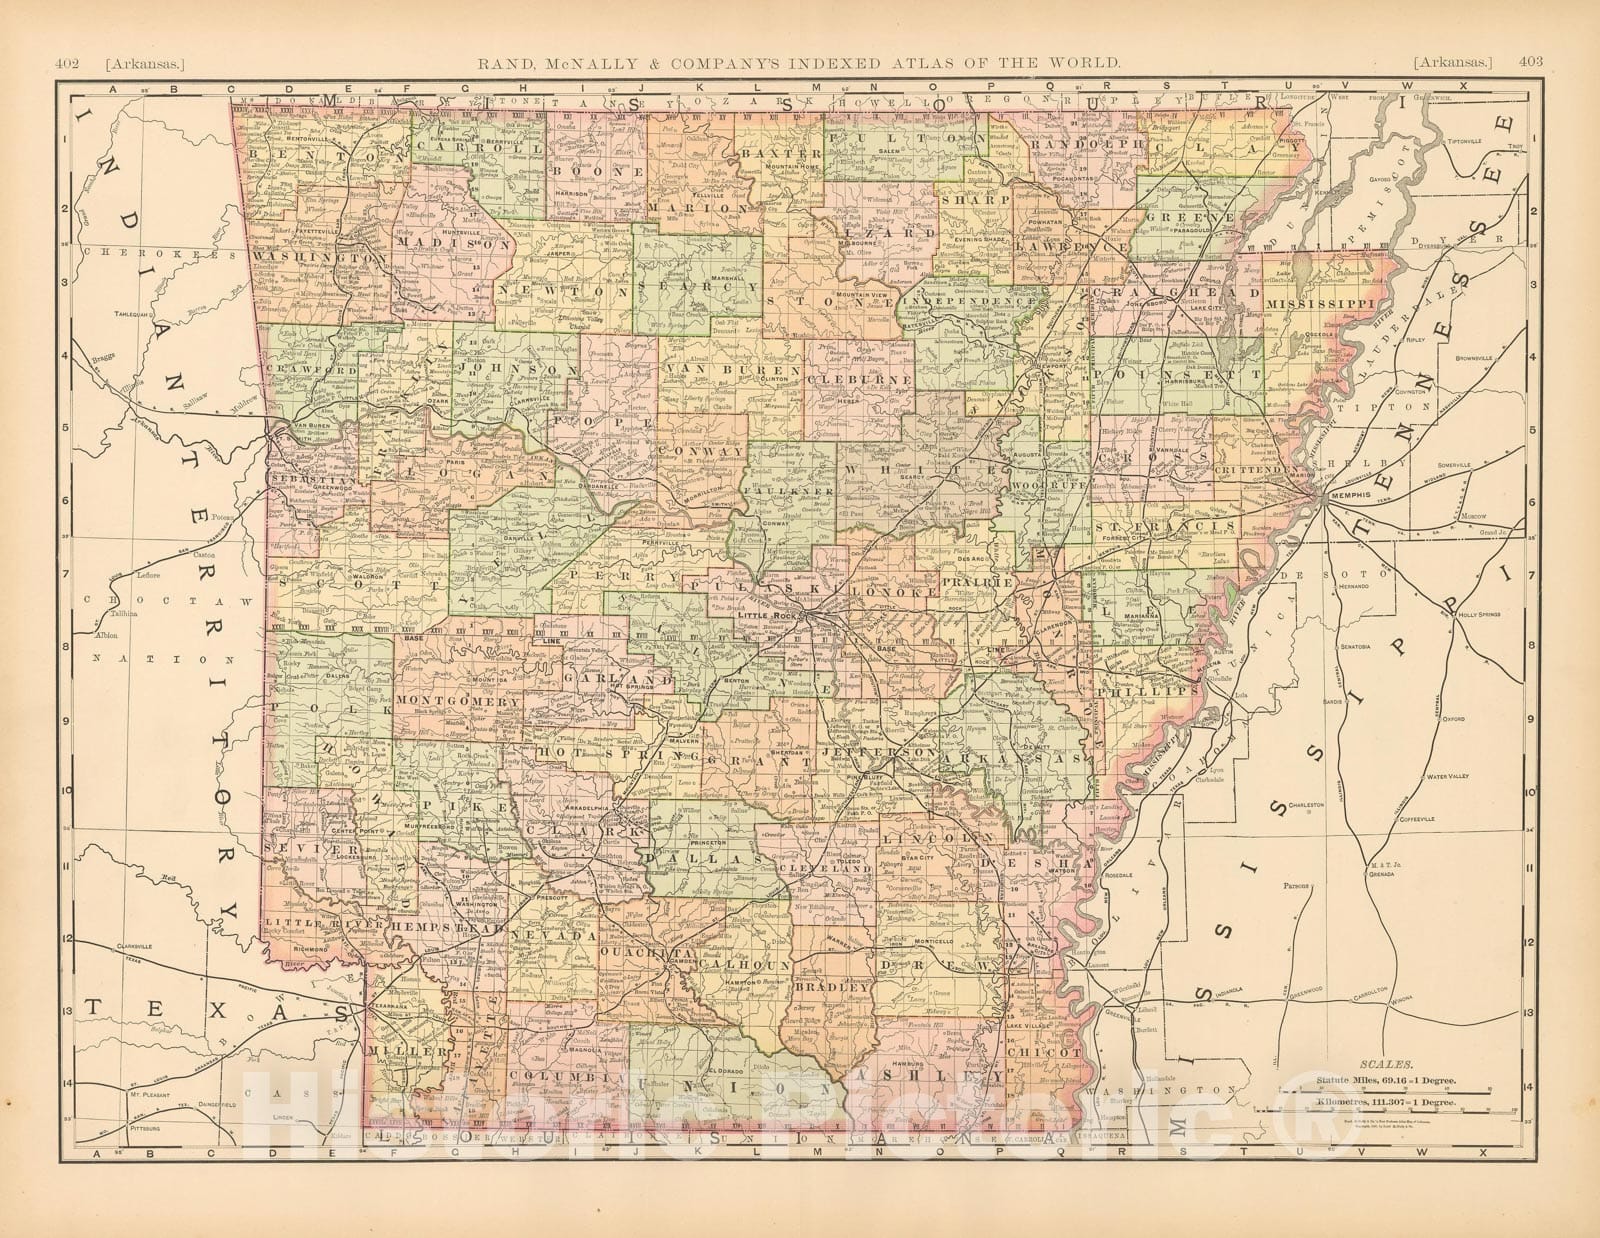 Arkansas, Louisiana and Mississippi 1883 Map 16x24 Inch / Fine Art Paper /  No Frame